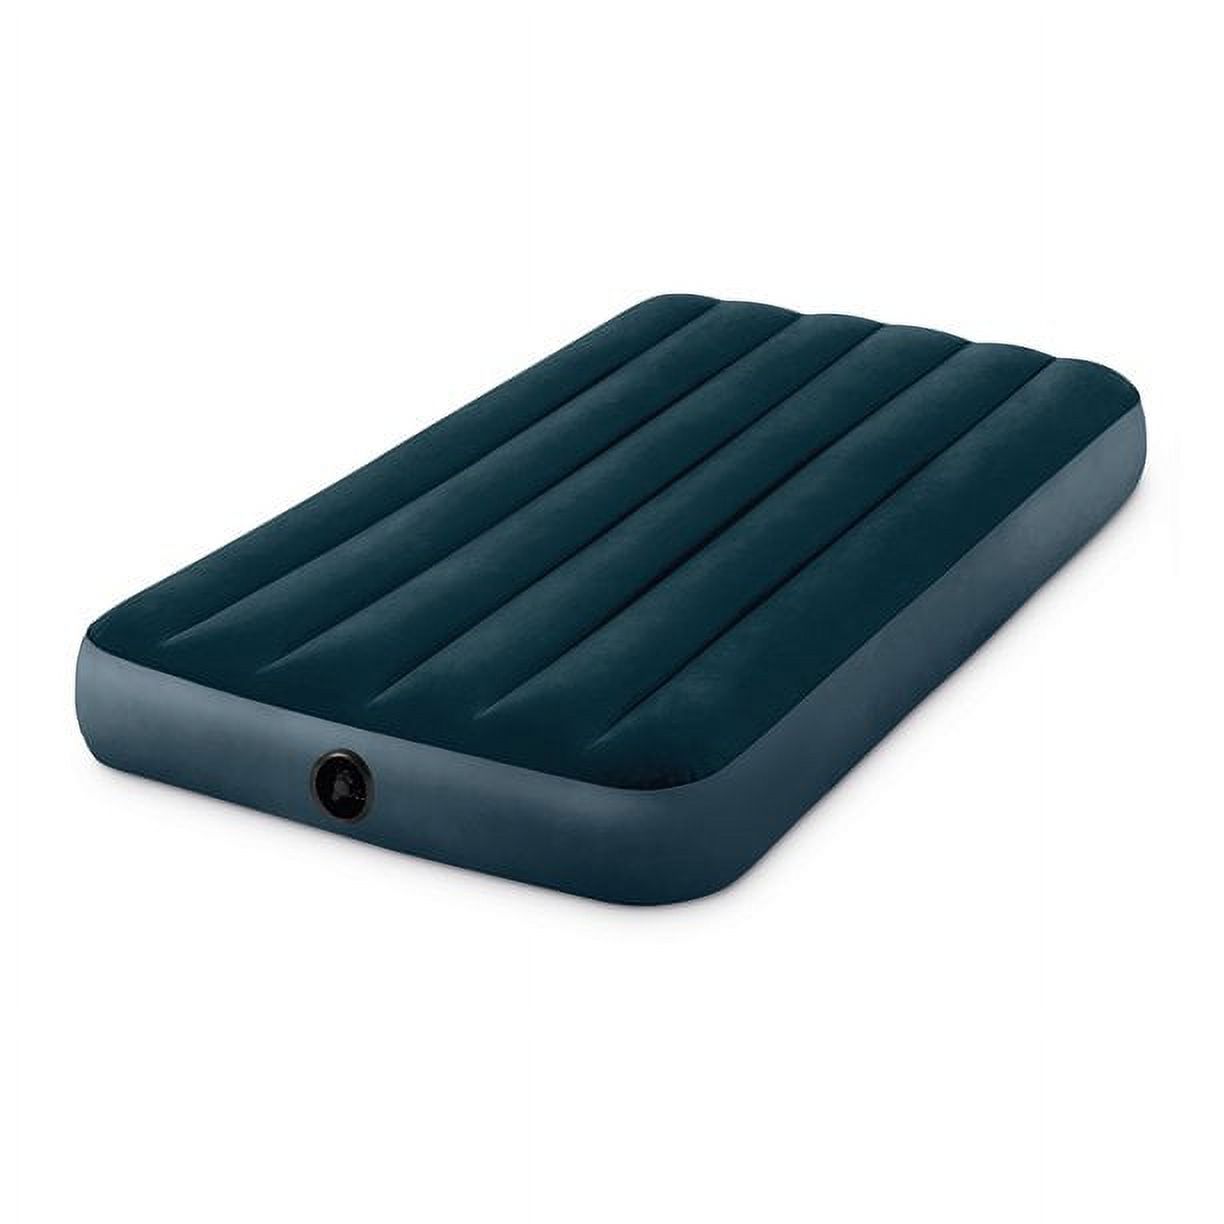 Intex 10in Standard Dura-Beam Airbed Mattress - Pump Not Included - Twin - image 1 of 8